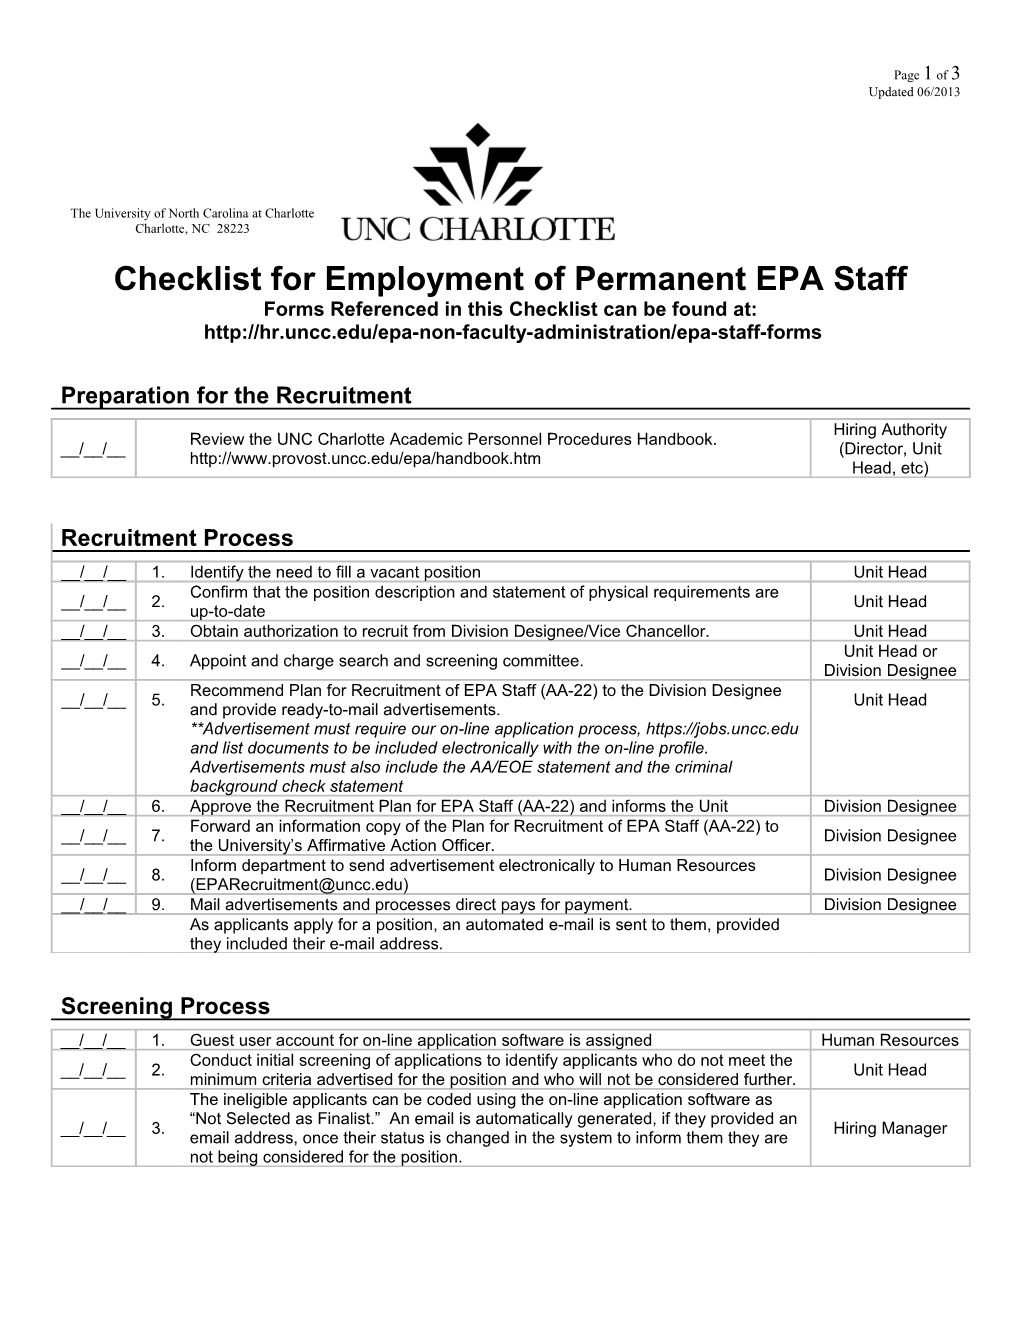 Checklist for Employment of Permanent EPA Staff s1